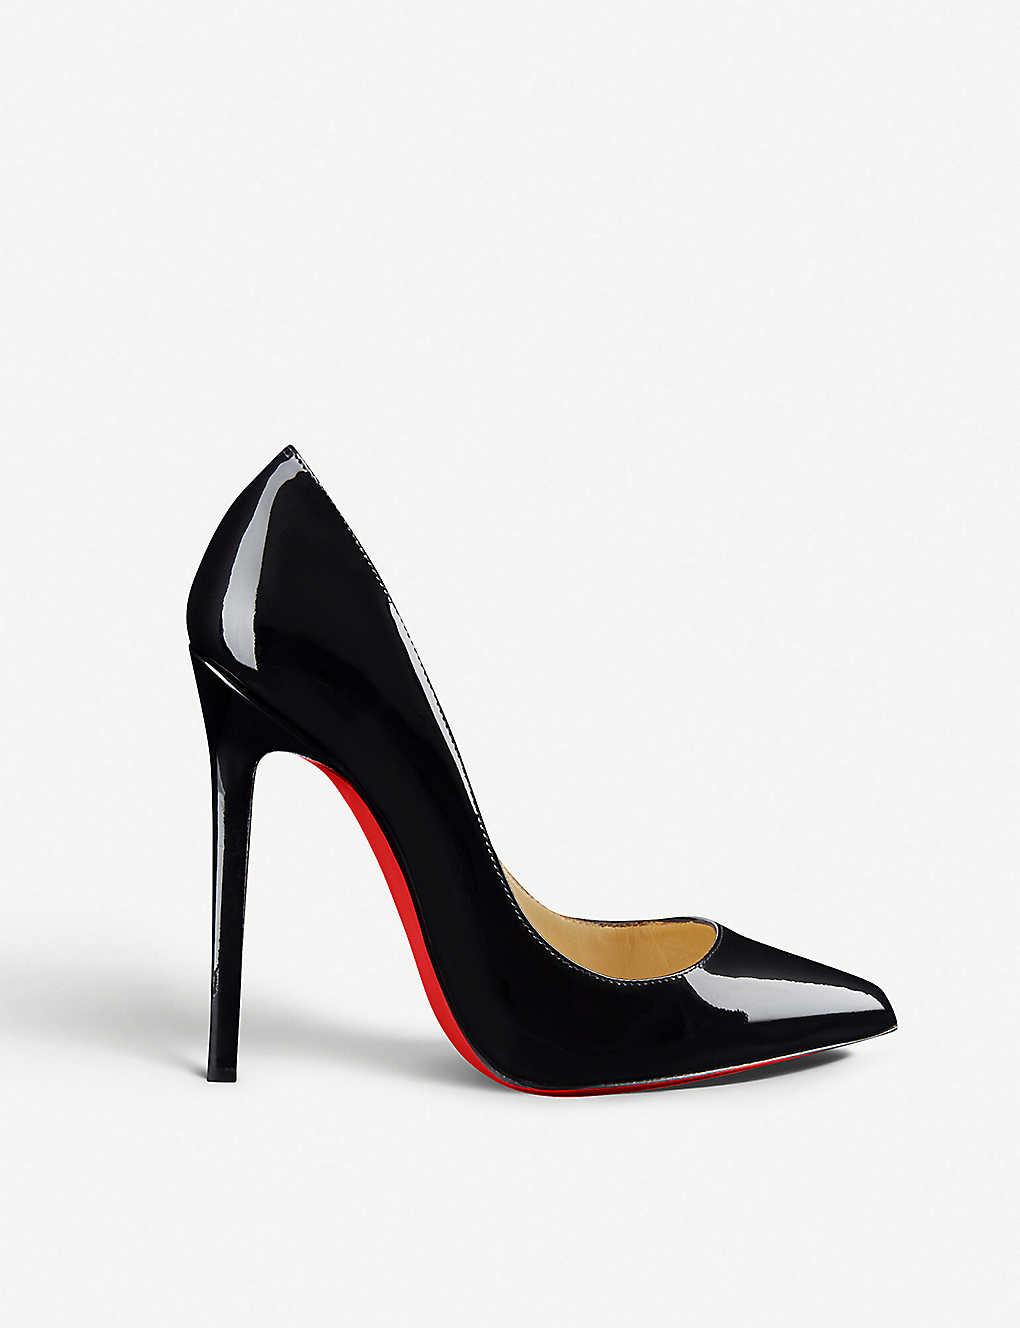 Christian Louboutin Leather Pigalle 120 Patent Calf in Black - Lyst